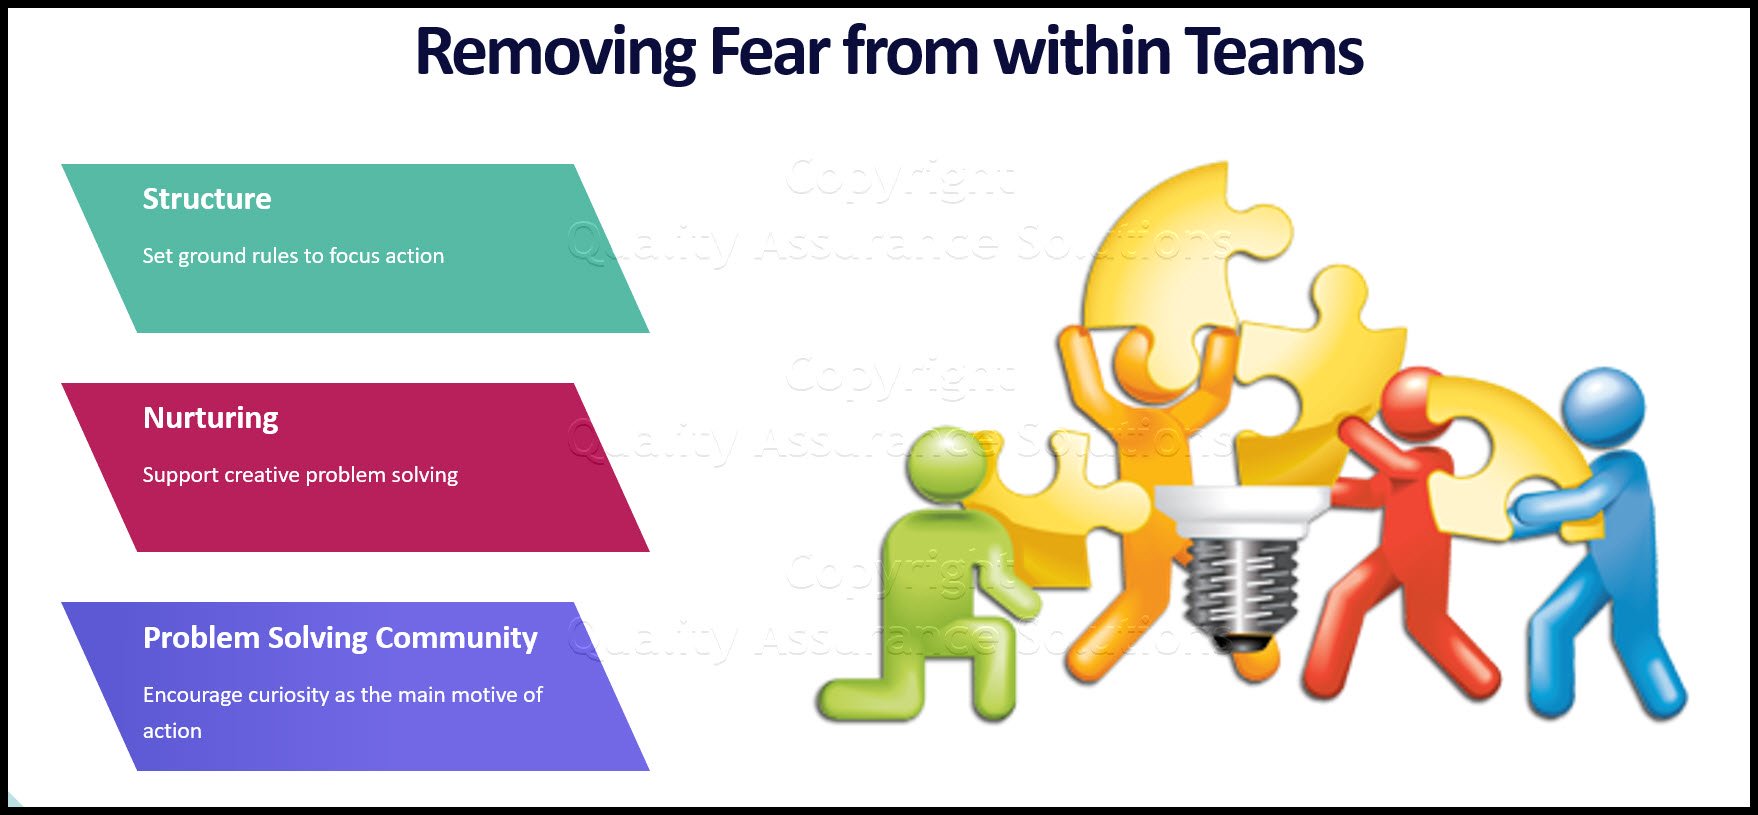 Ideas for team building: Getting to the core ideas of what develops a team built on trust and loyalty.